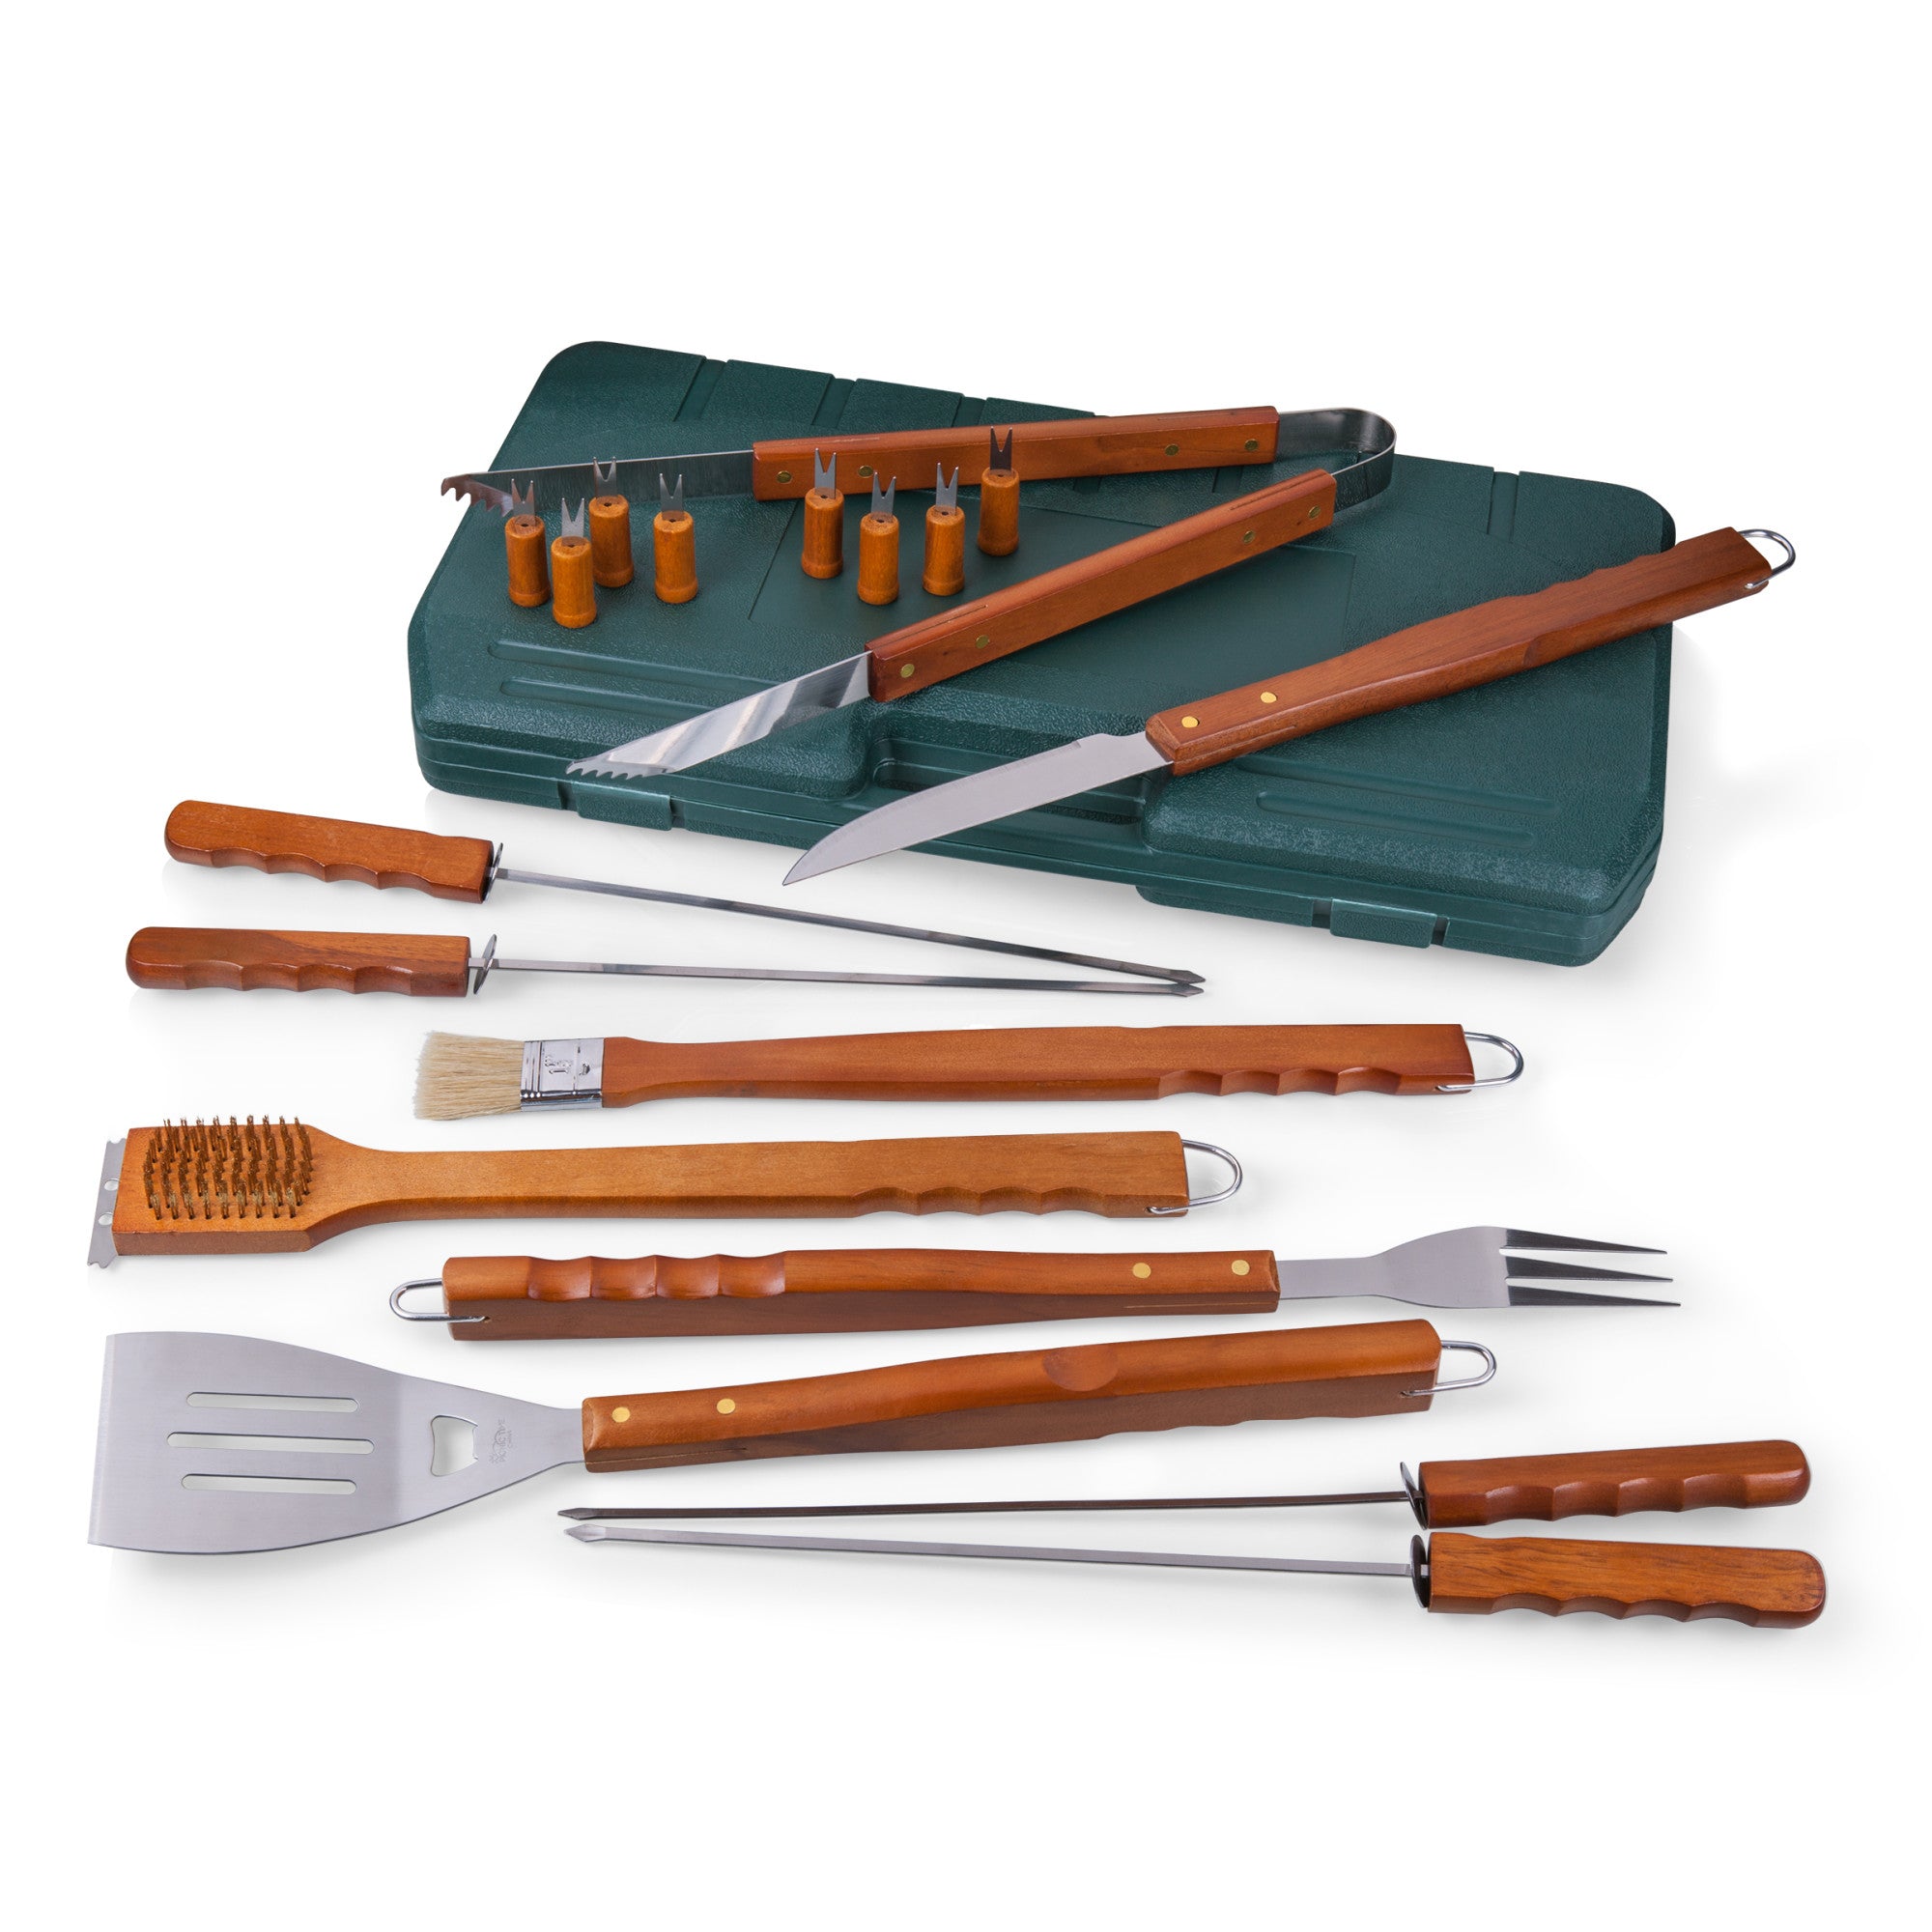 20 Piece Deluxe Grill Set - Innovative Grilling Tools 